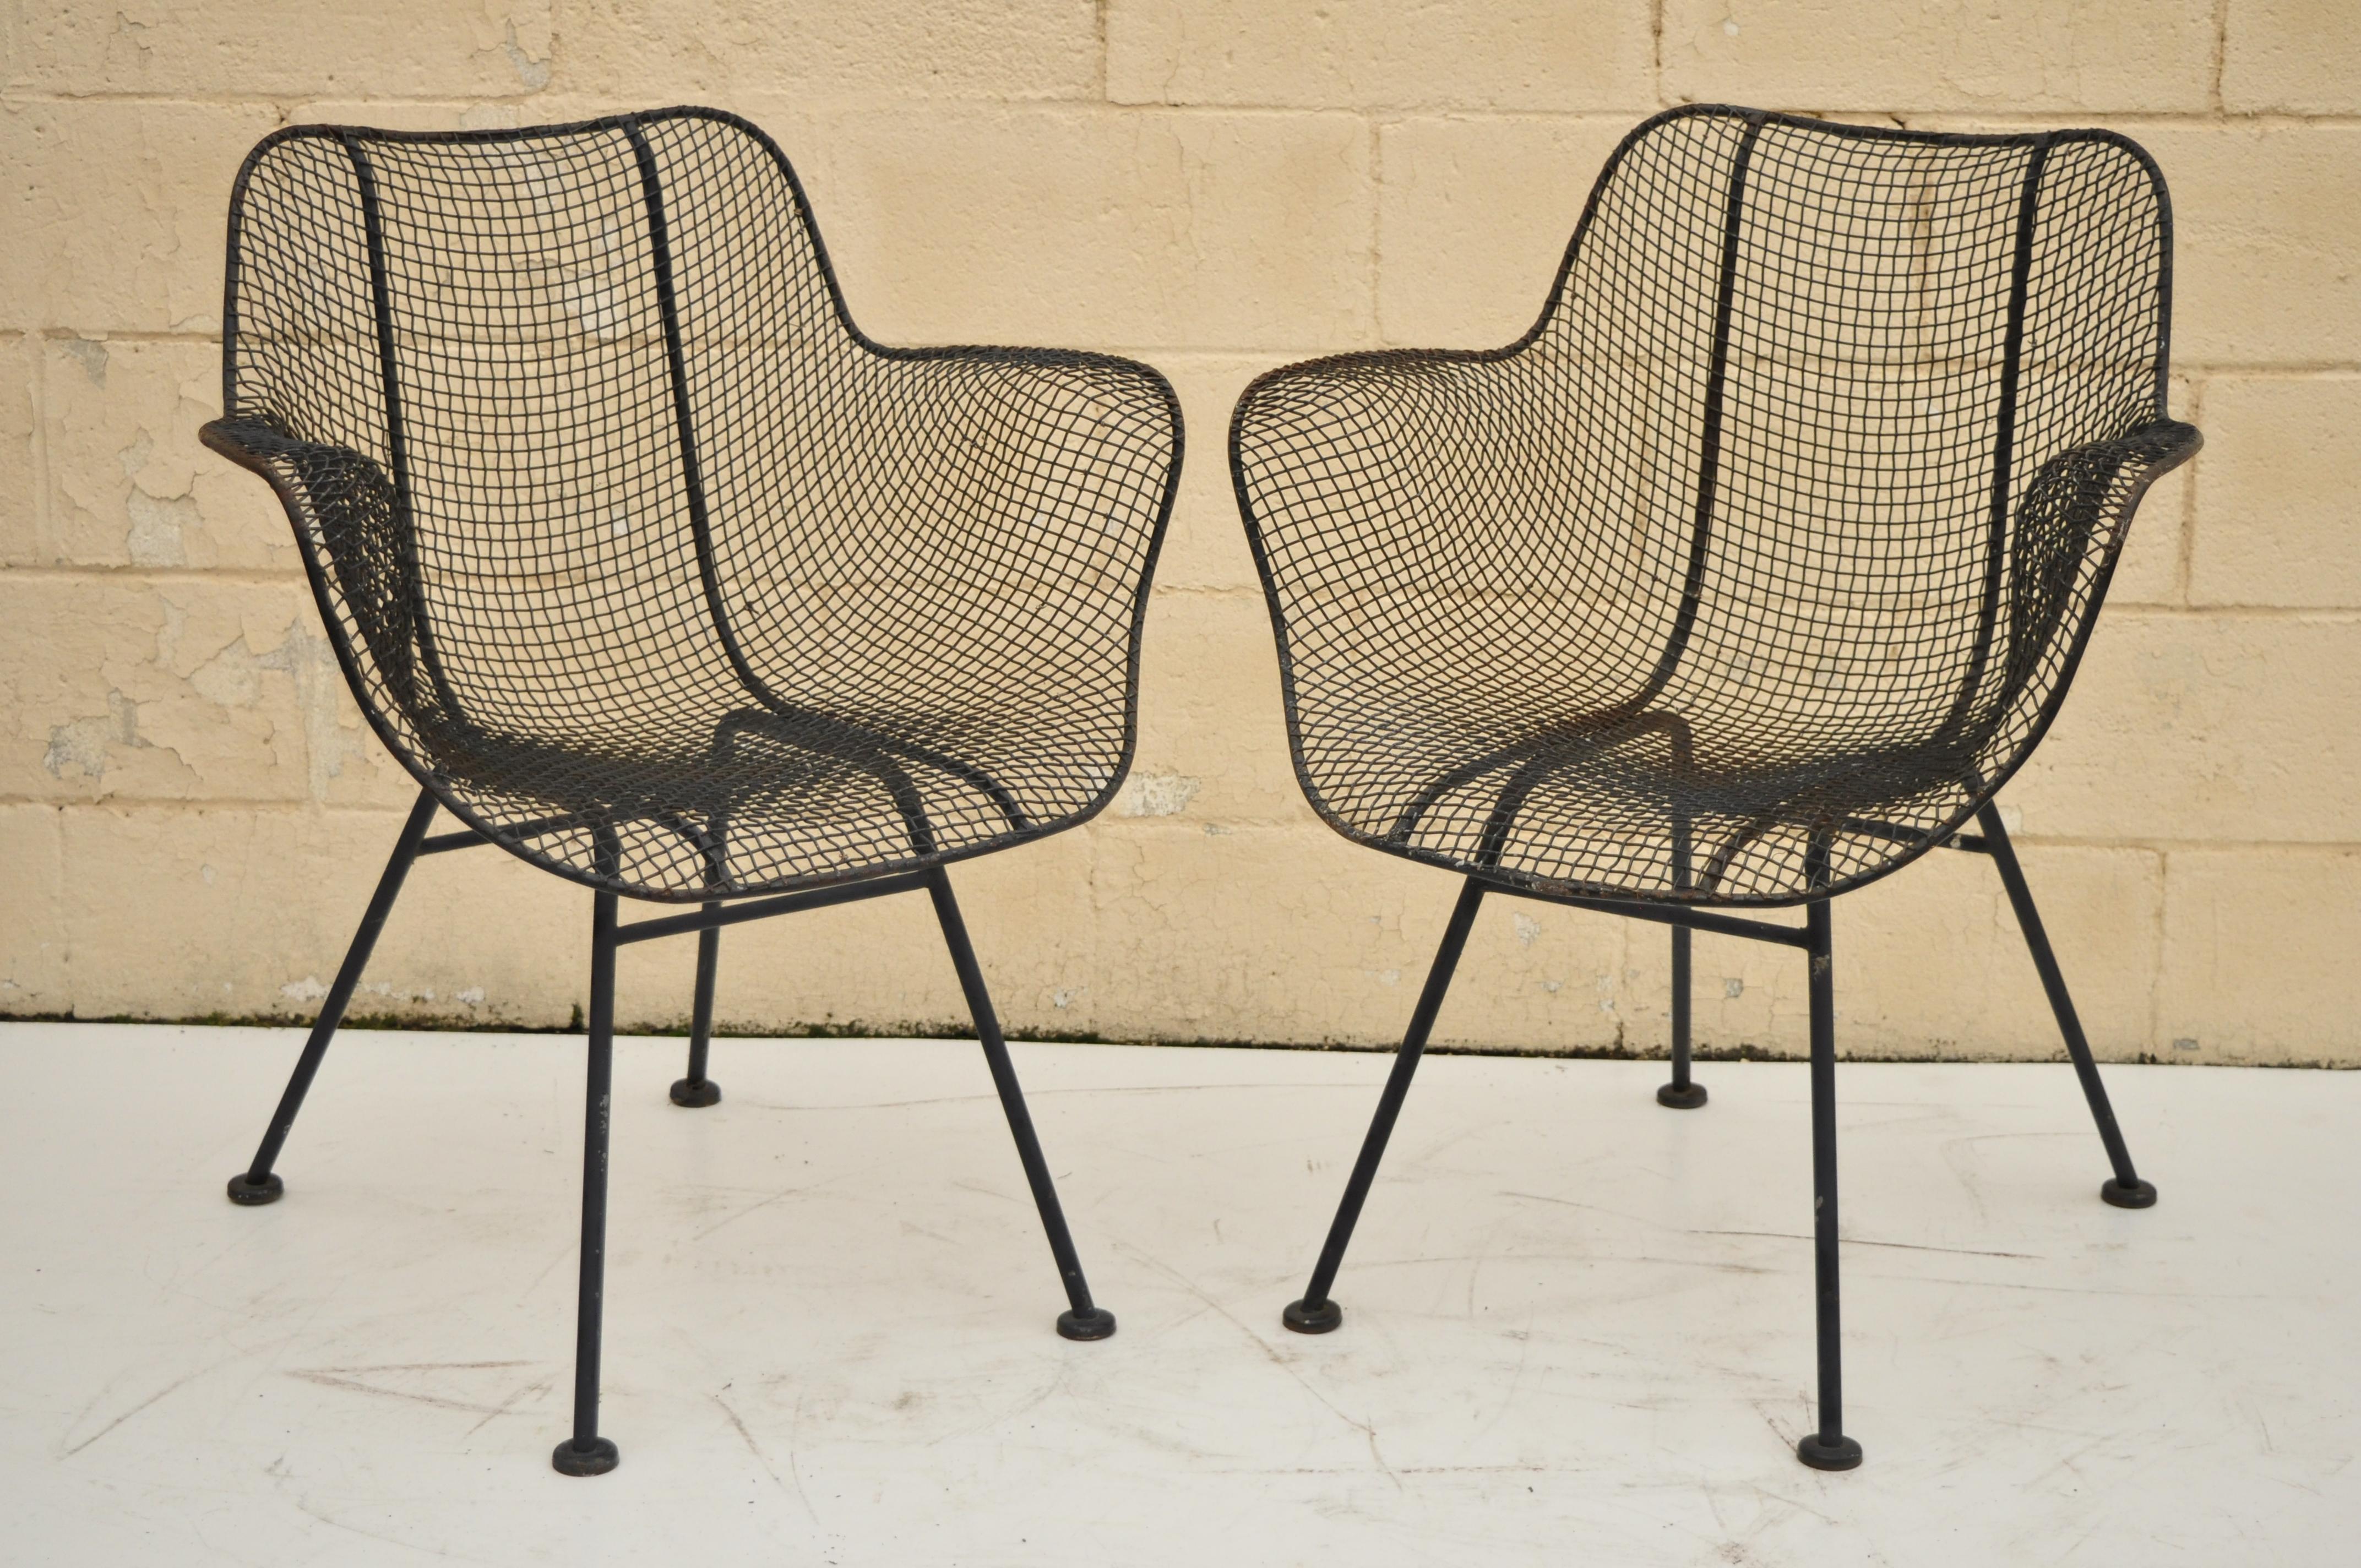 Pair of vintage Russell Woodard Sculptura metal mesh wrought iron dining side chairs. Items feature iron frame, metal mesh seats, iconic Mid-Century Modern design, very nice vintage item, circa 1950. Measurements: 32